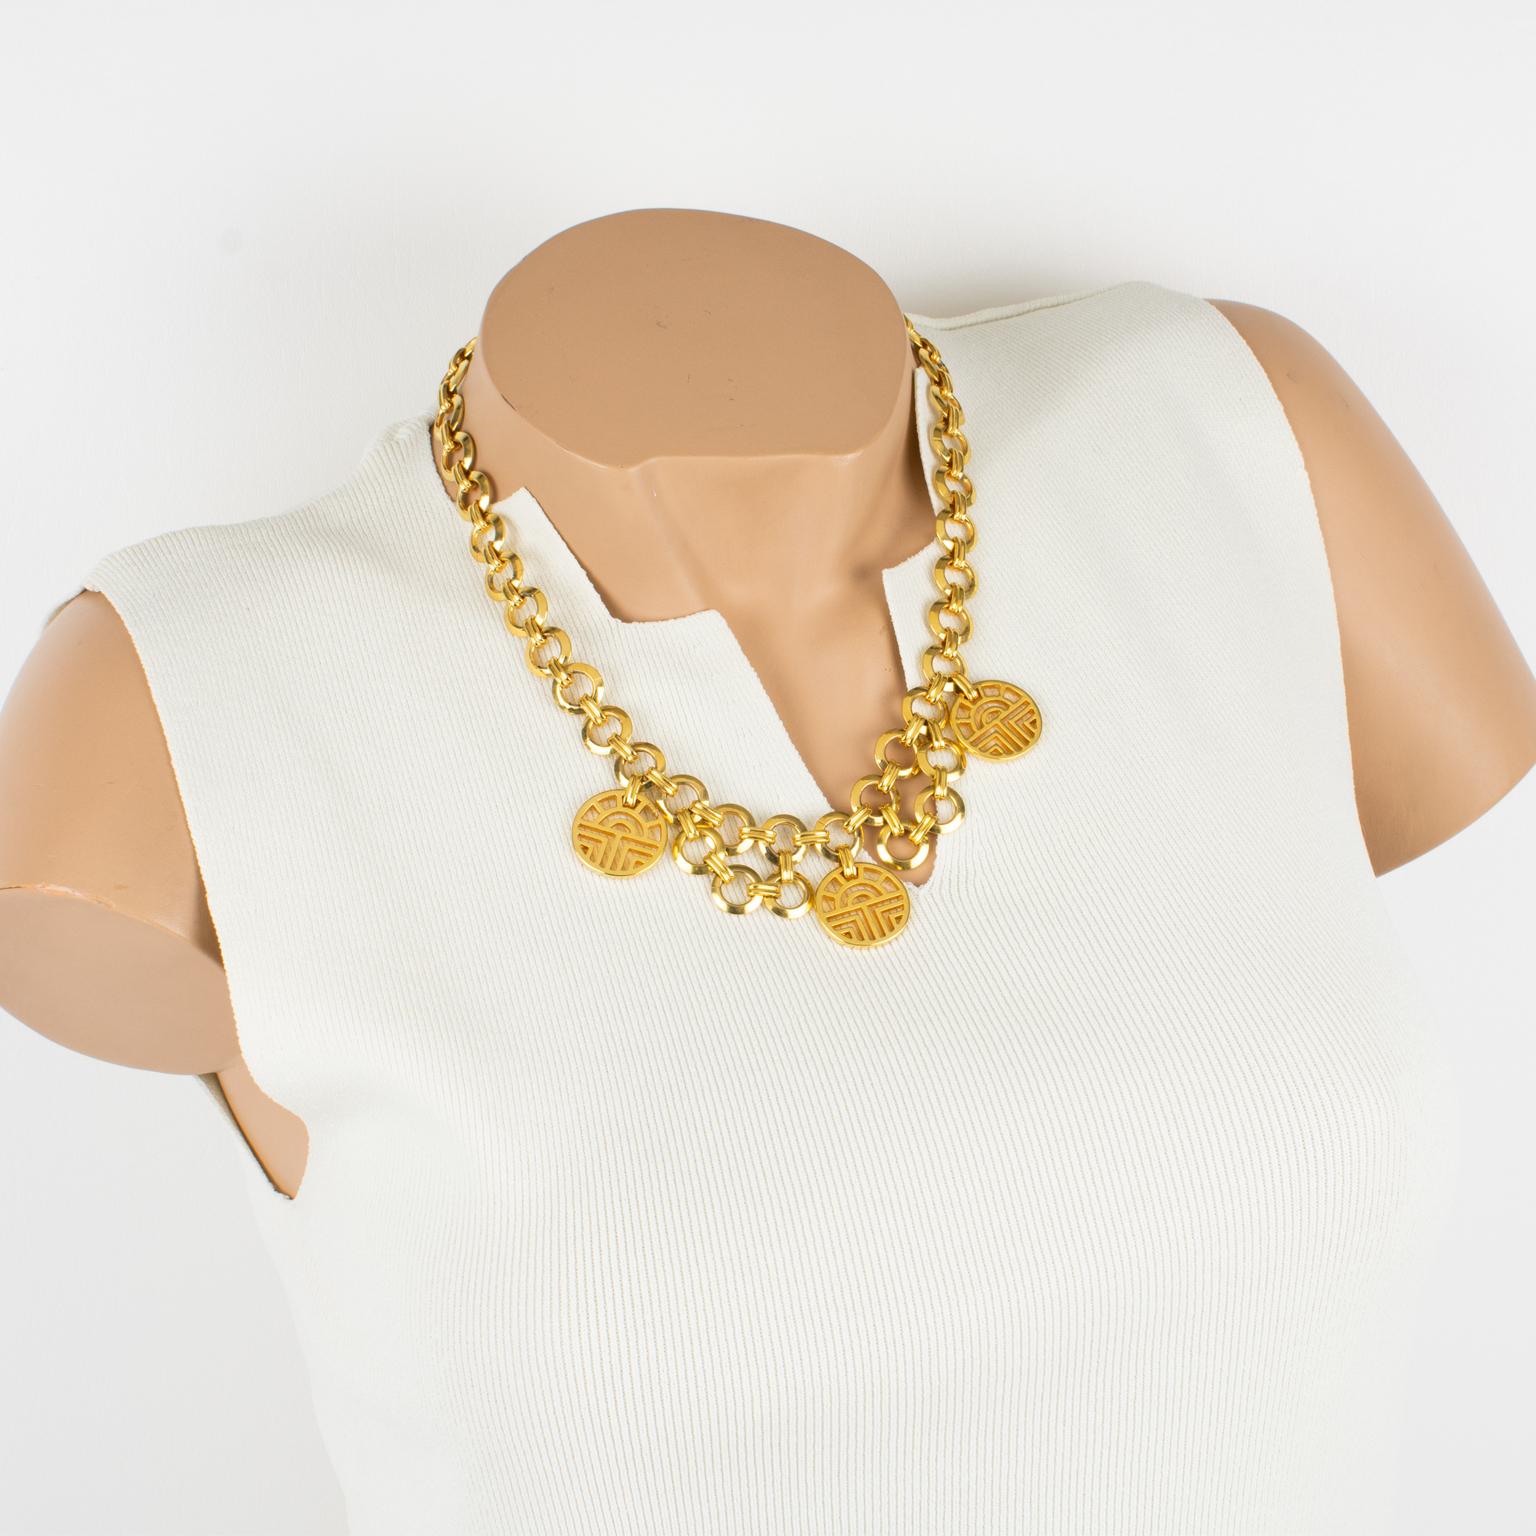 This elegant Louis Feraud Paris choker necklace features a romantic chain-necklace shape with gilded ornate iconic brand logo charms. The necklace closes with a lobster closing clasp and an extra chain gives length flexibility to the necklace.